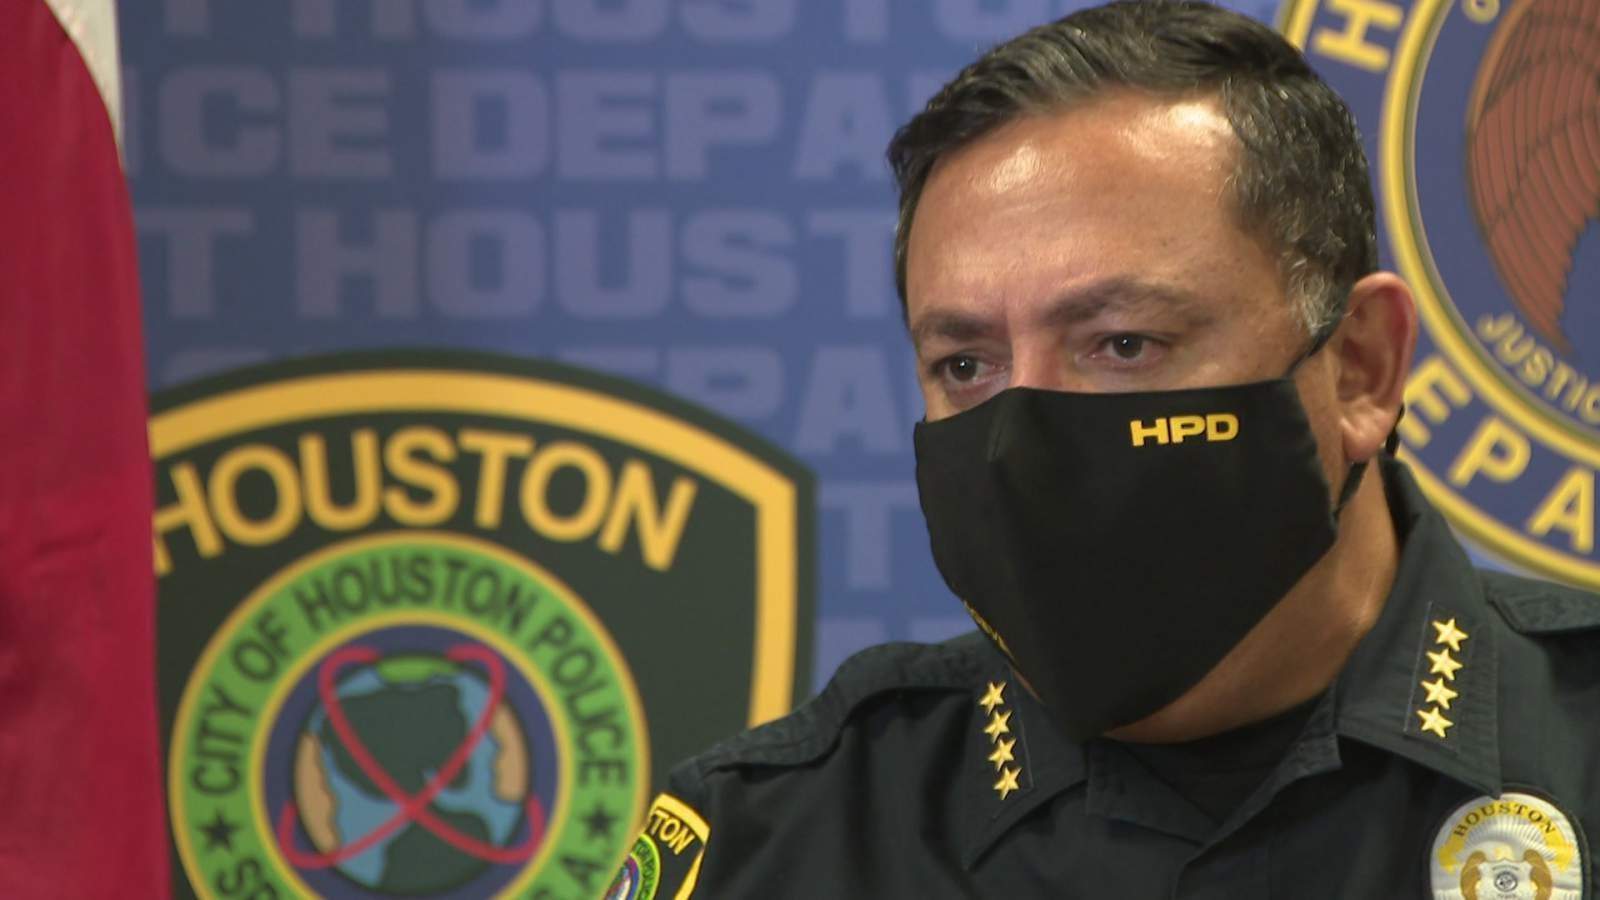 Houston police chief Art Acevedo leaves the post for a new job